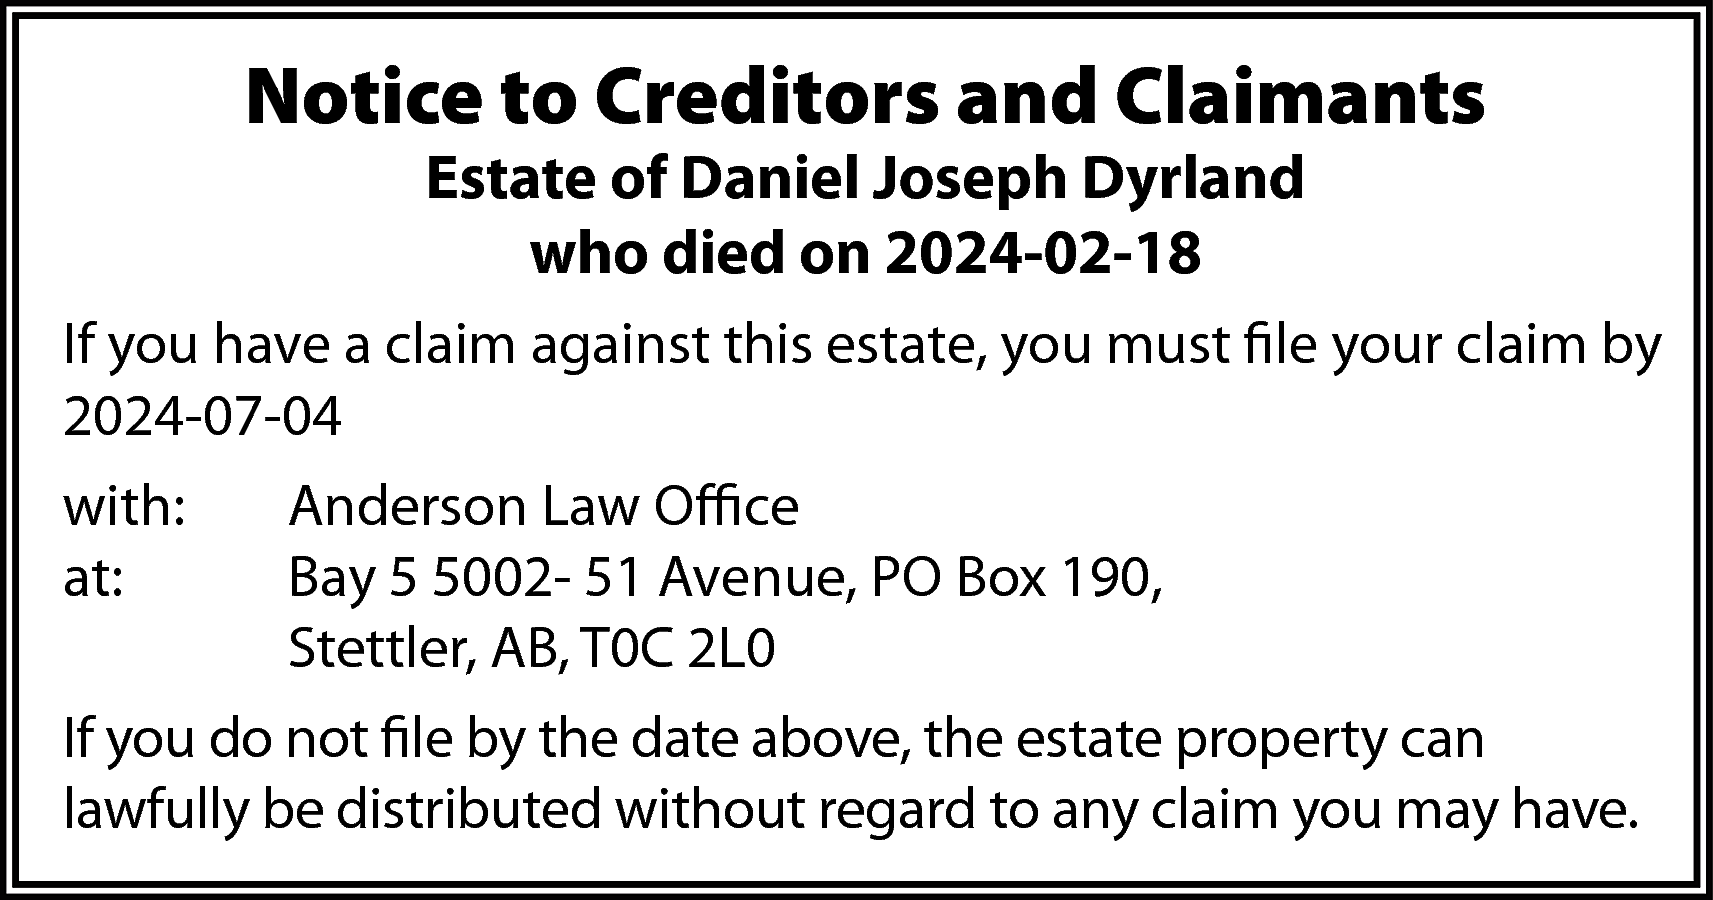 Notice to Creditors and Claimants  Notice to Creditors and Claimants  Estate of Daniel Joseph Dyrland  who died on 2024-02-18    If you have a claim against this estate, you must file your claim by  2024-07-04  with:  at:    Anderson Law Office  Bay 5 5002- 51 Avenue, PO Box 190,  Stettler, AB, T0C 2L0    If you do not file by the date above, the estate property can  lawfully be distributed without regard to any claim you may have.    